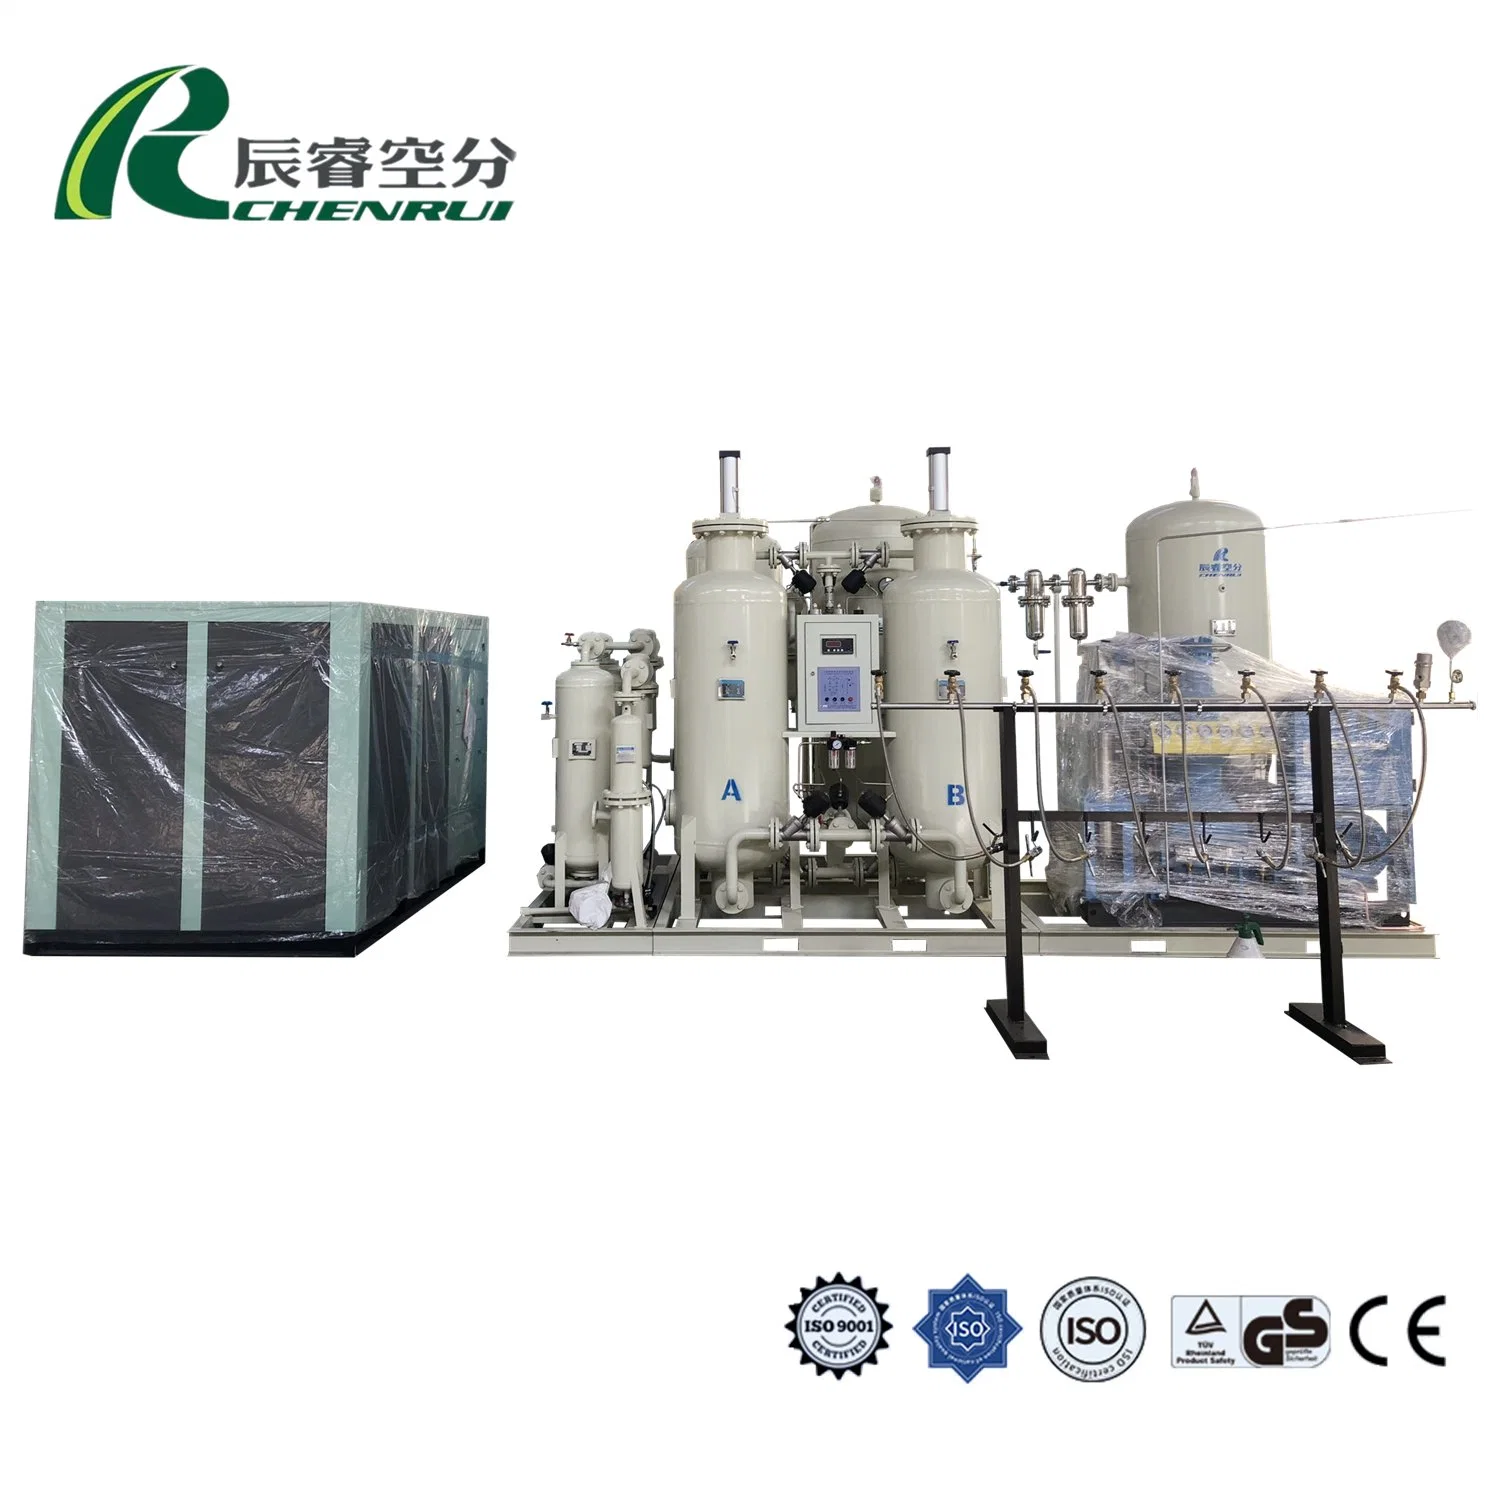 Chenrui Industrial Portable Oxygen-Air Separation Device for Oxygen Production